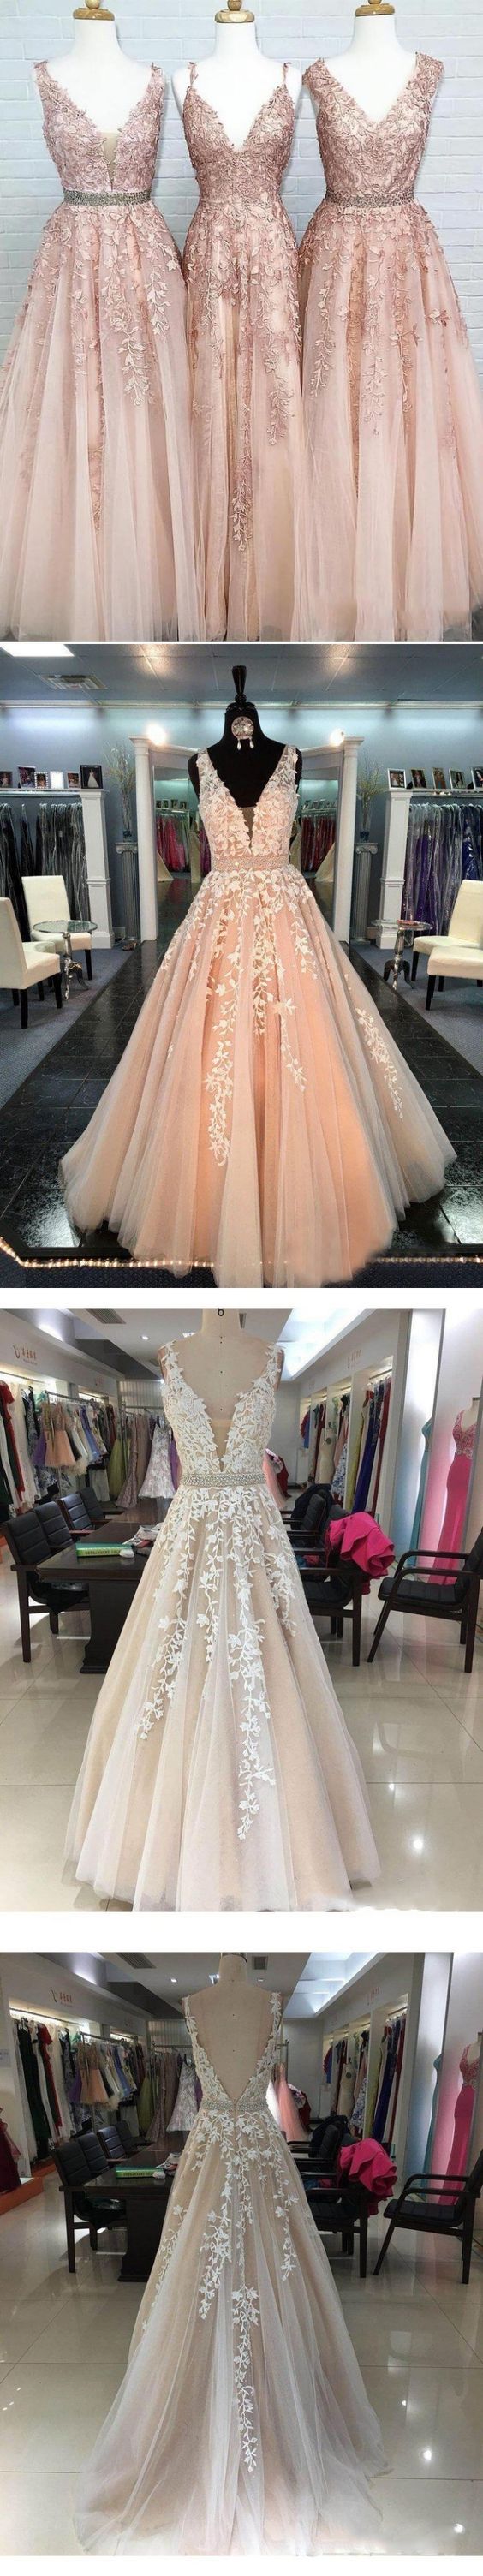 Beautiful Prom Dresses With Straps Aline Appliques Long Sparkly Open Back Prom Dress M6824